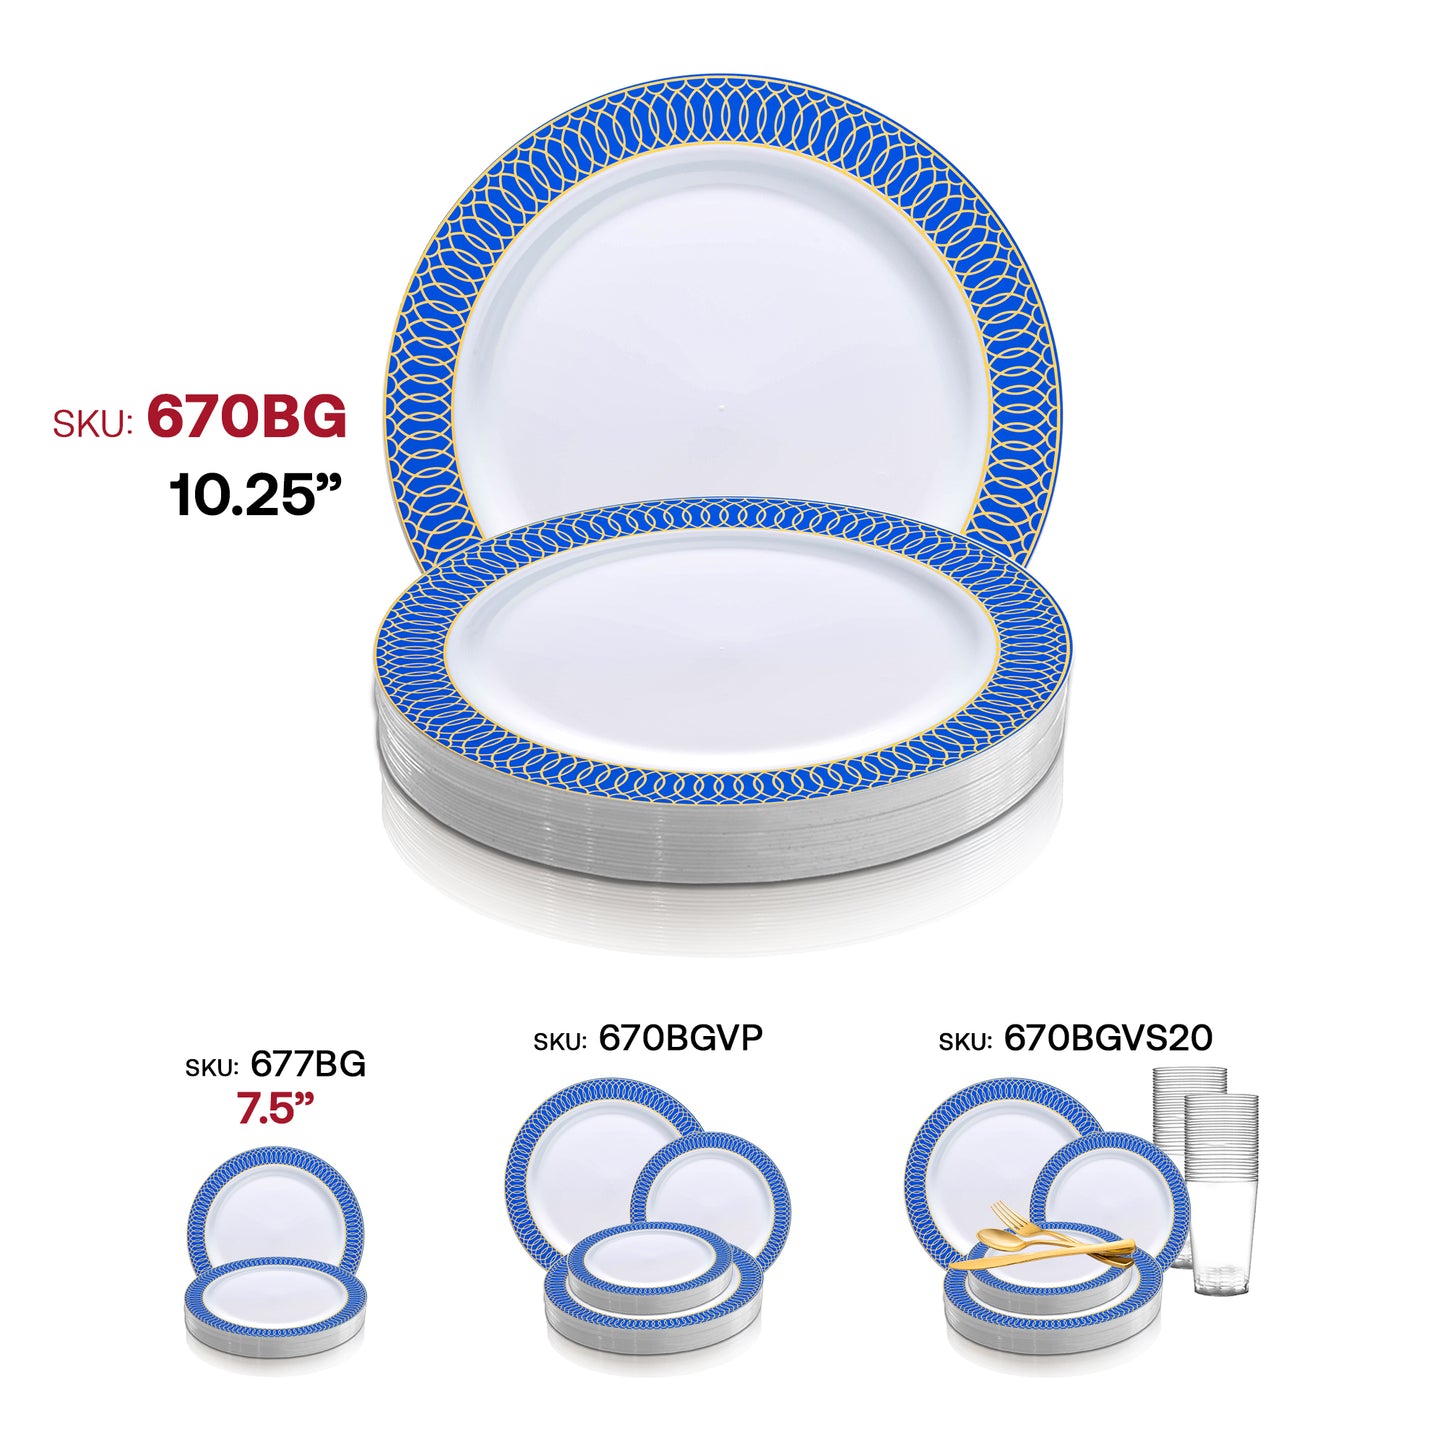 White with Gold Spiral on Blue Rim Plastic Dinner Plates (10.25") SKU | The Kaya Collection